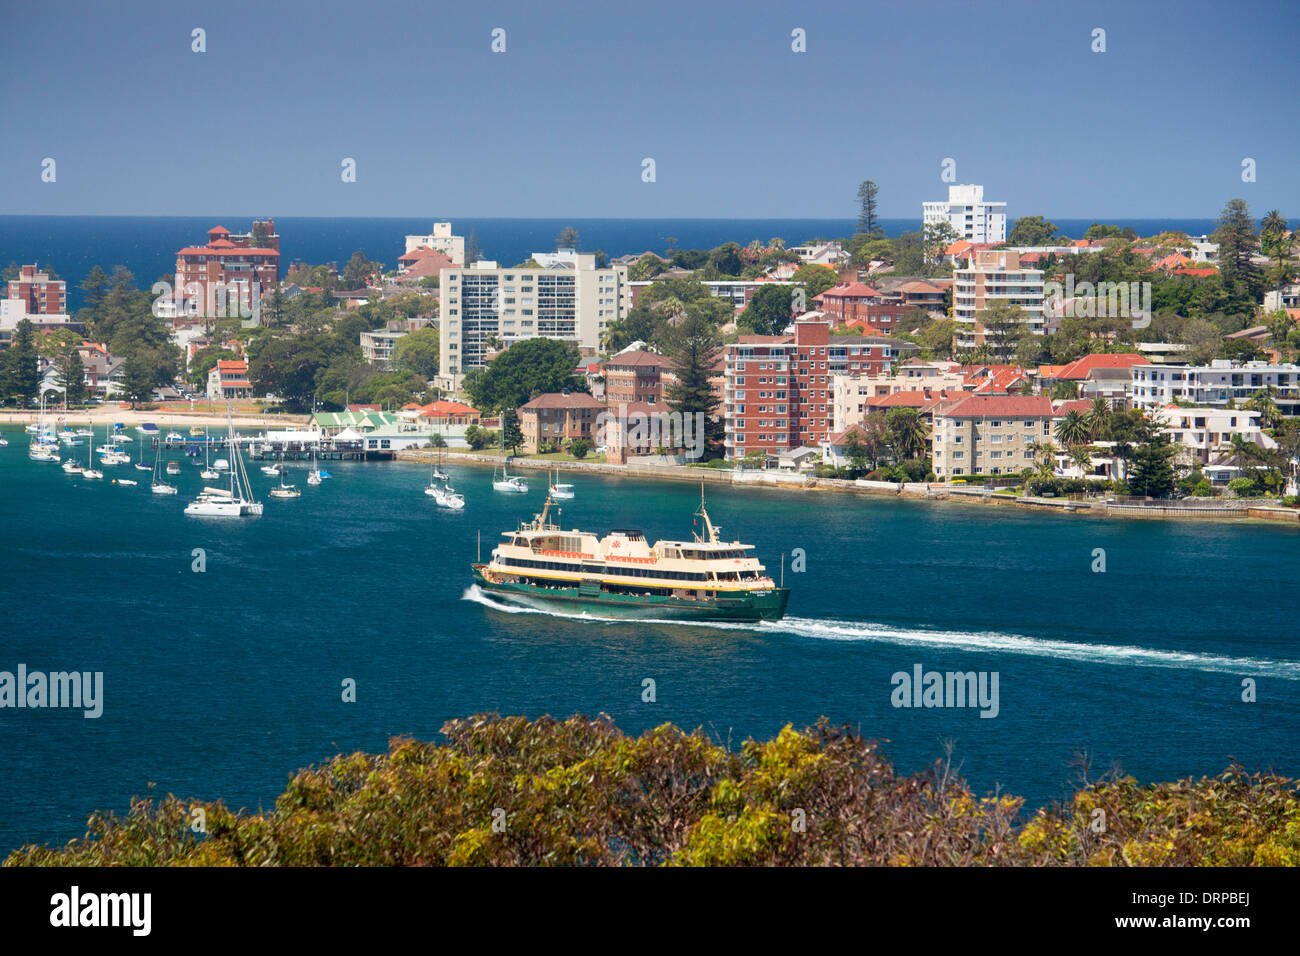 Manly ferry 'Freshwater' on approach to Manly Tasman Sea Pacific Ocean Sydney Harbour Sydney New South Wales NSW Australia Stock Photo